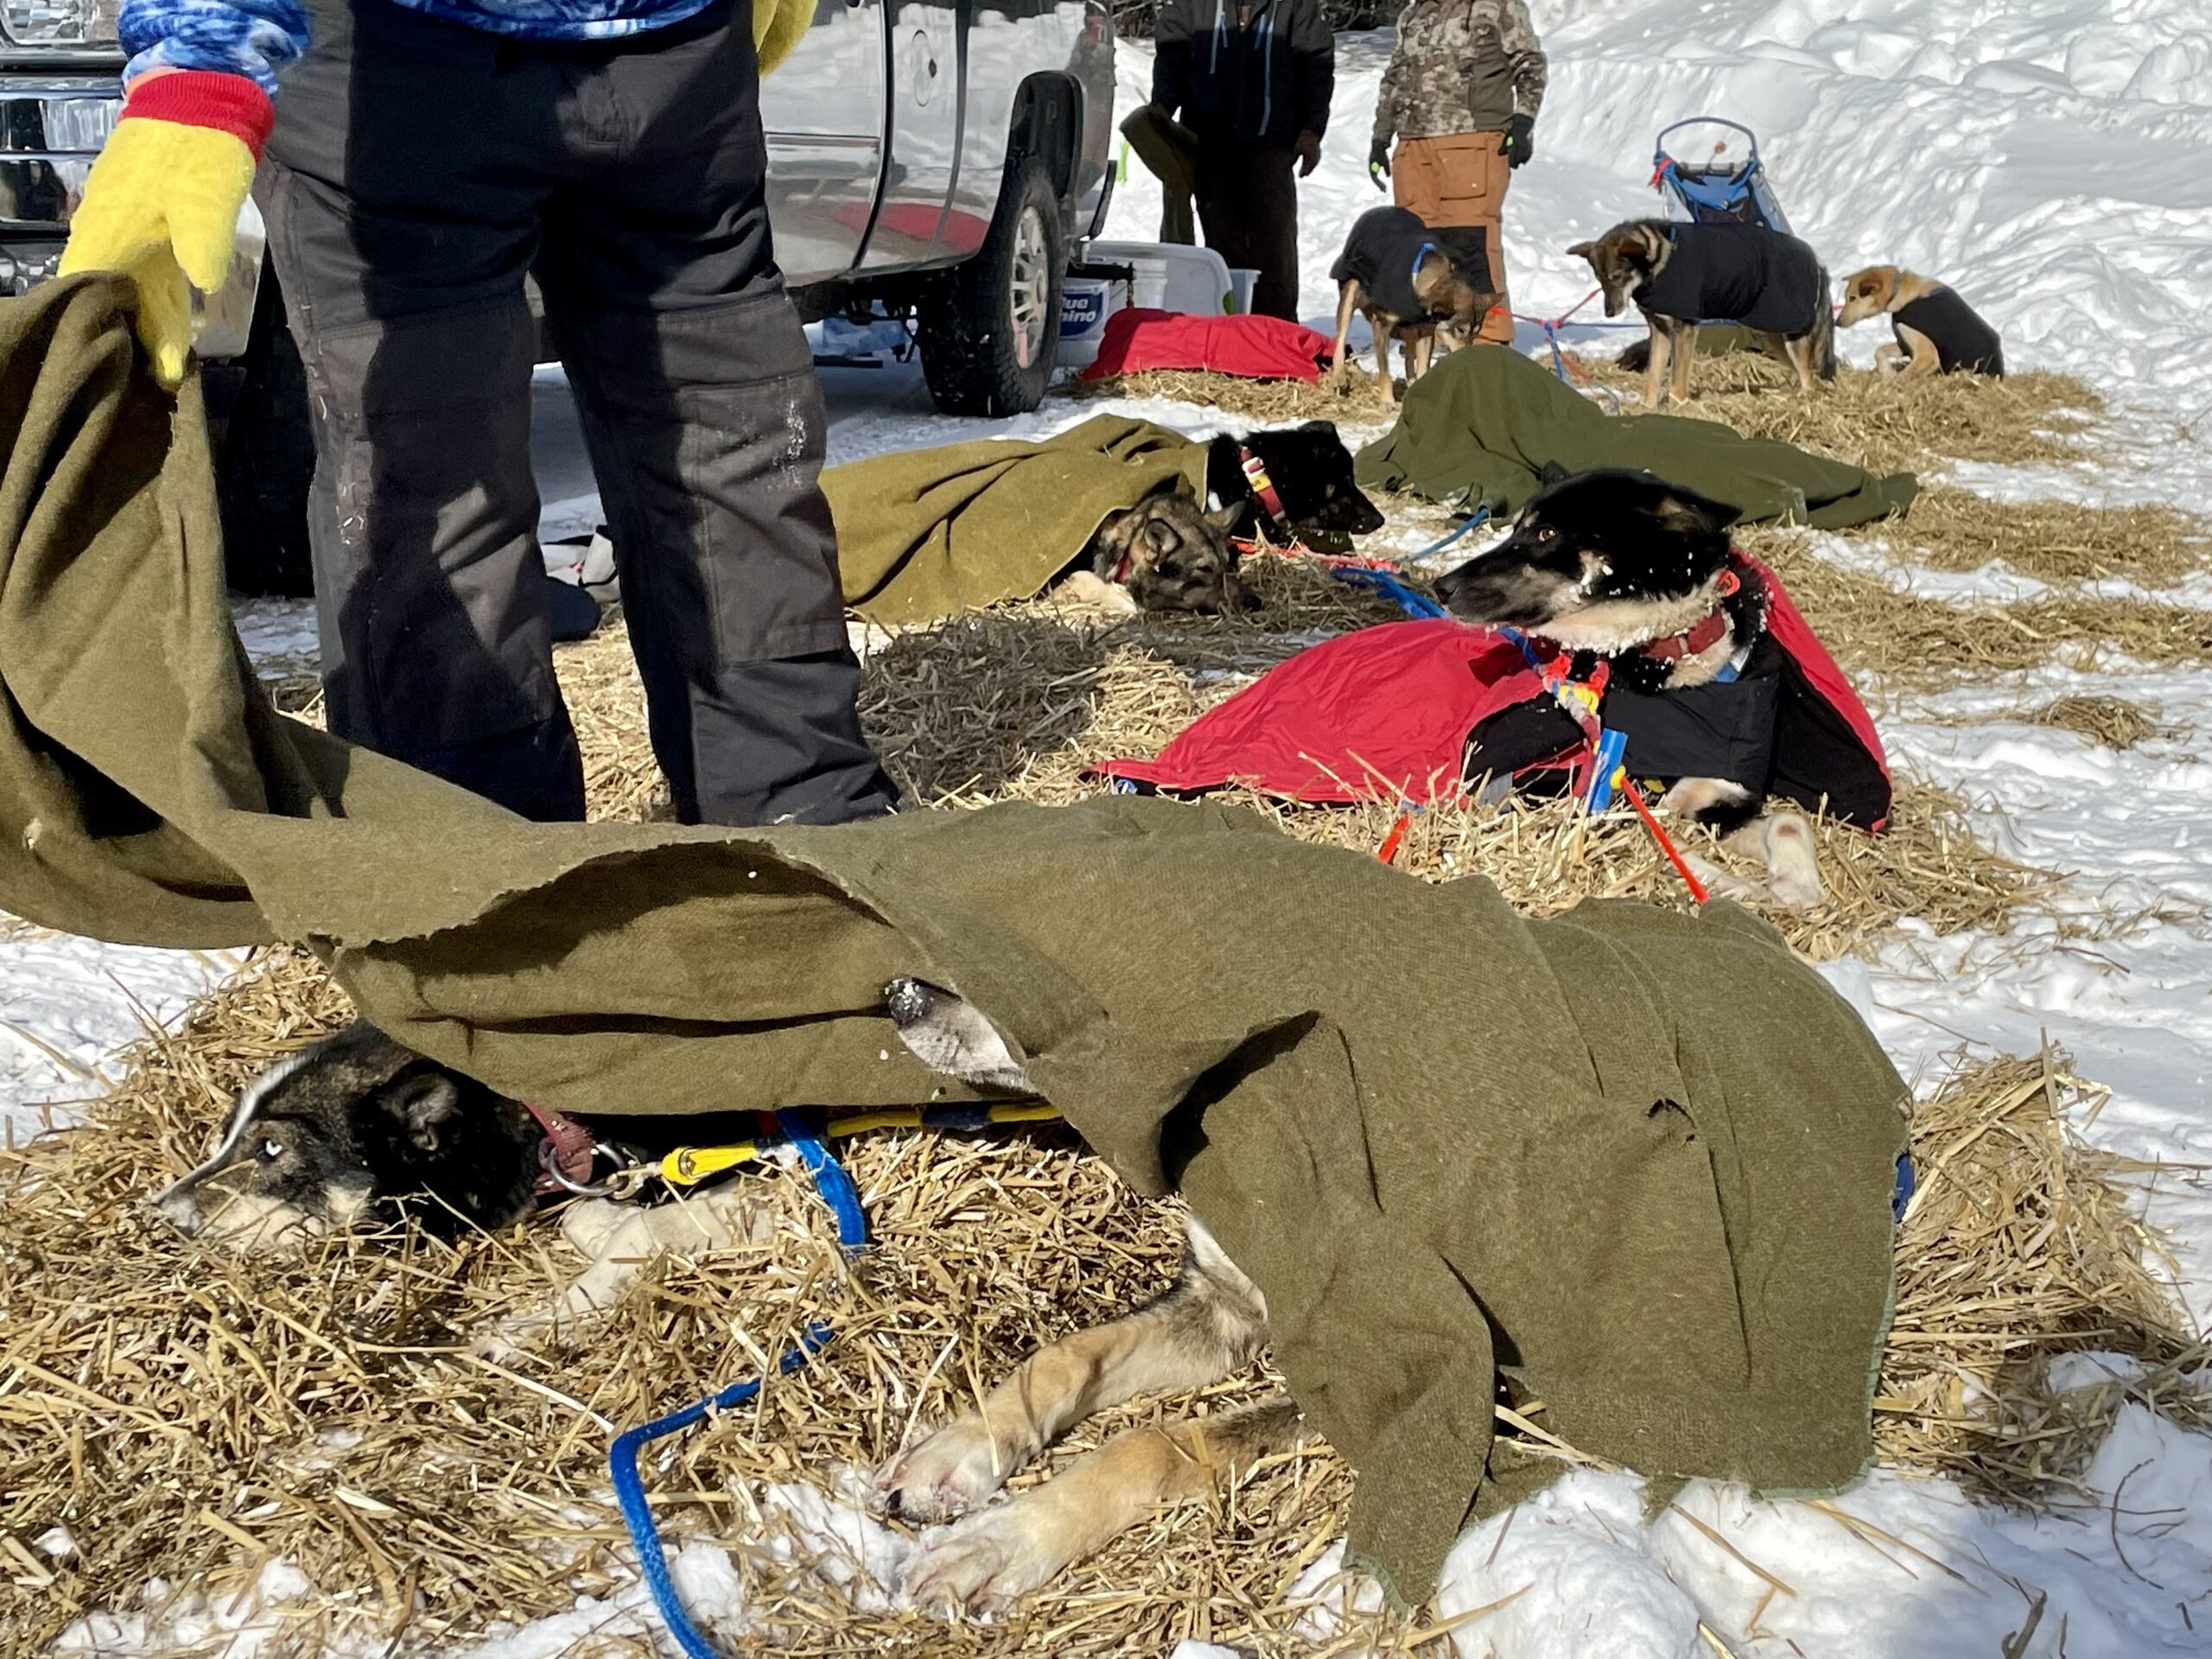 Sled dogs nap on straw with blankets.